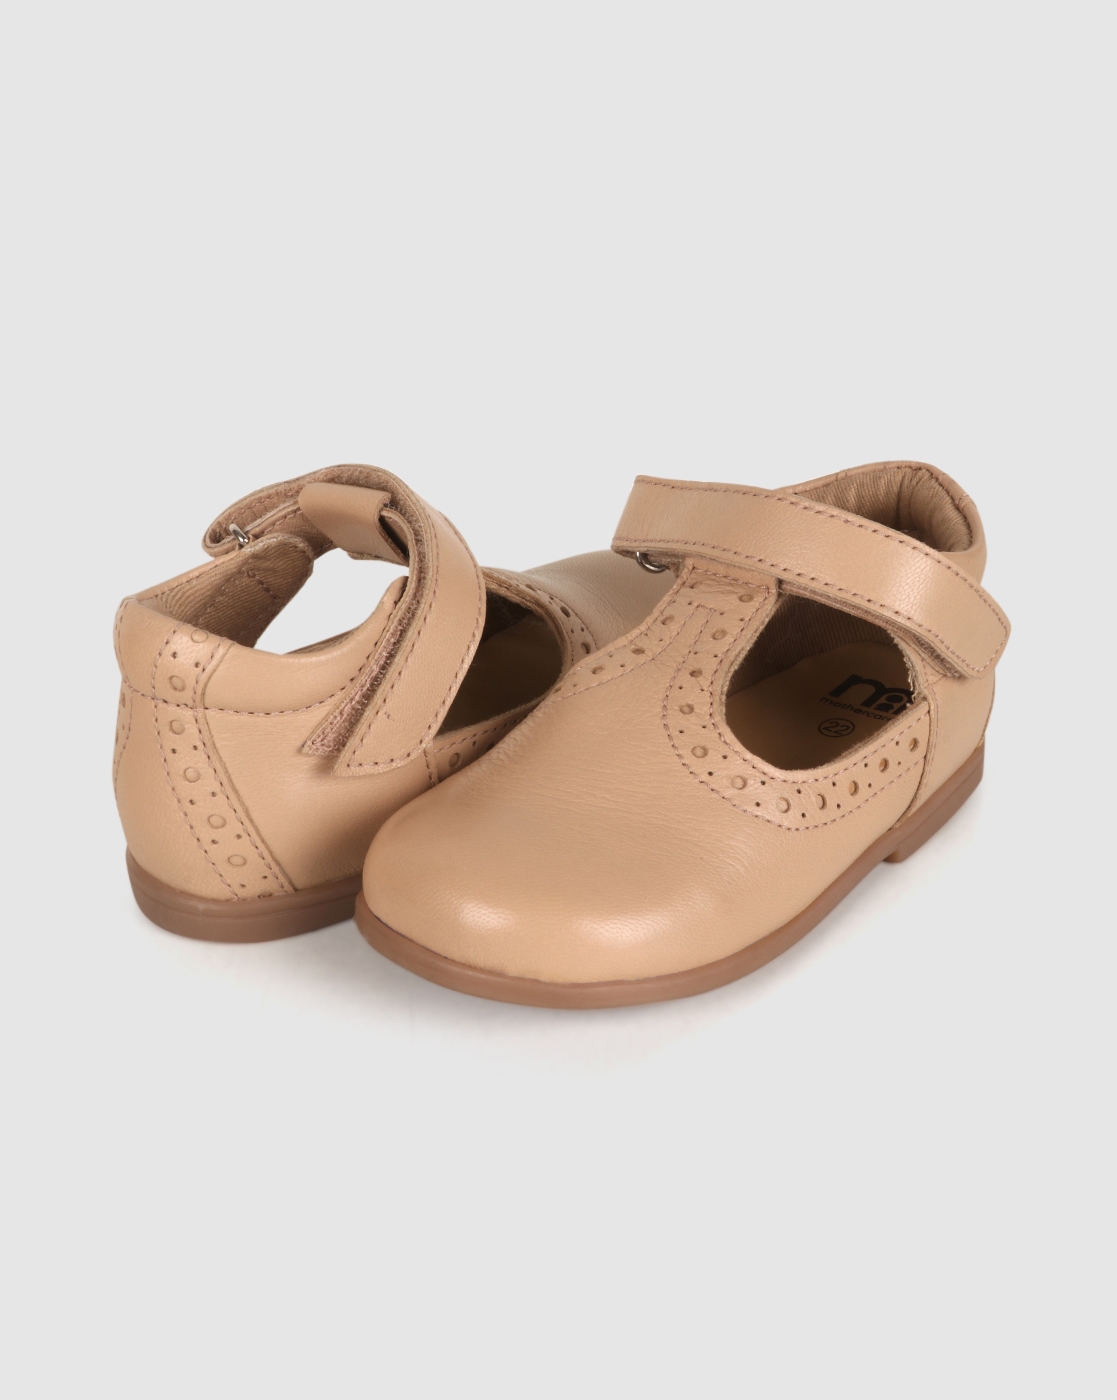 Mothercare | Girls First Walker Shoes Cut Out Design - Ivory